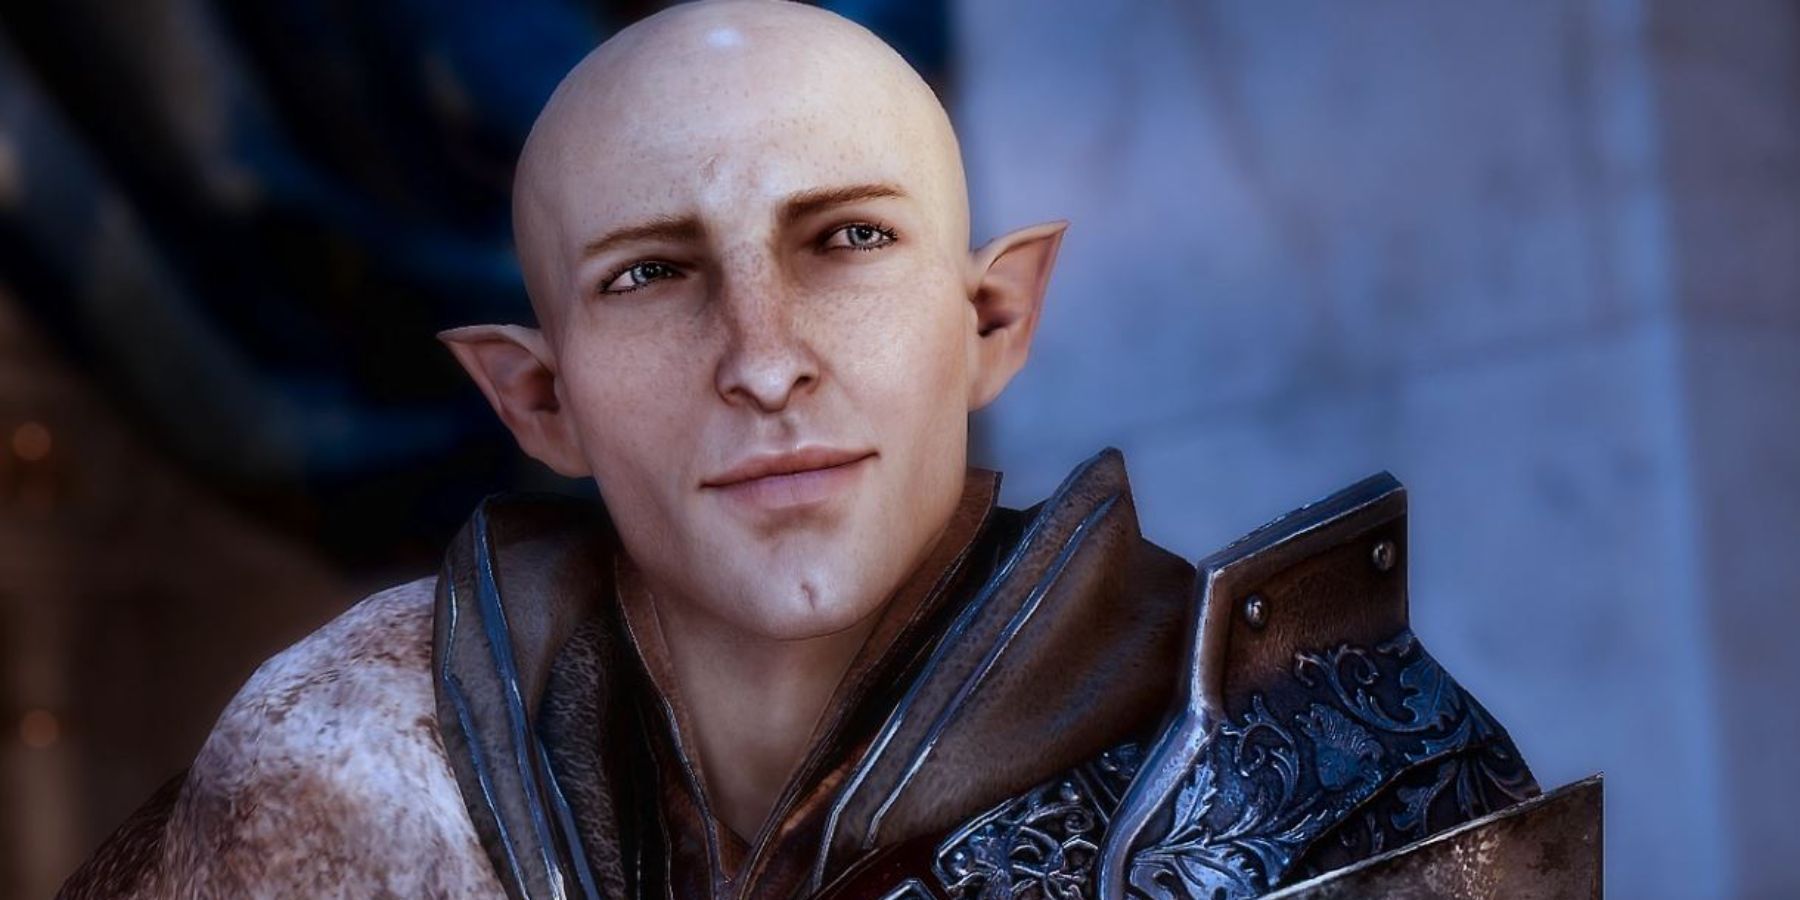 Solas conversing with someone